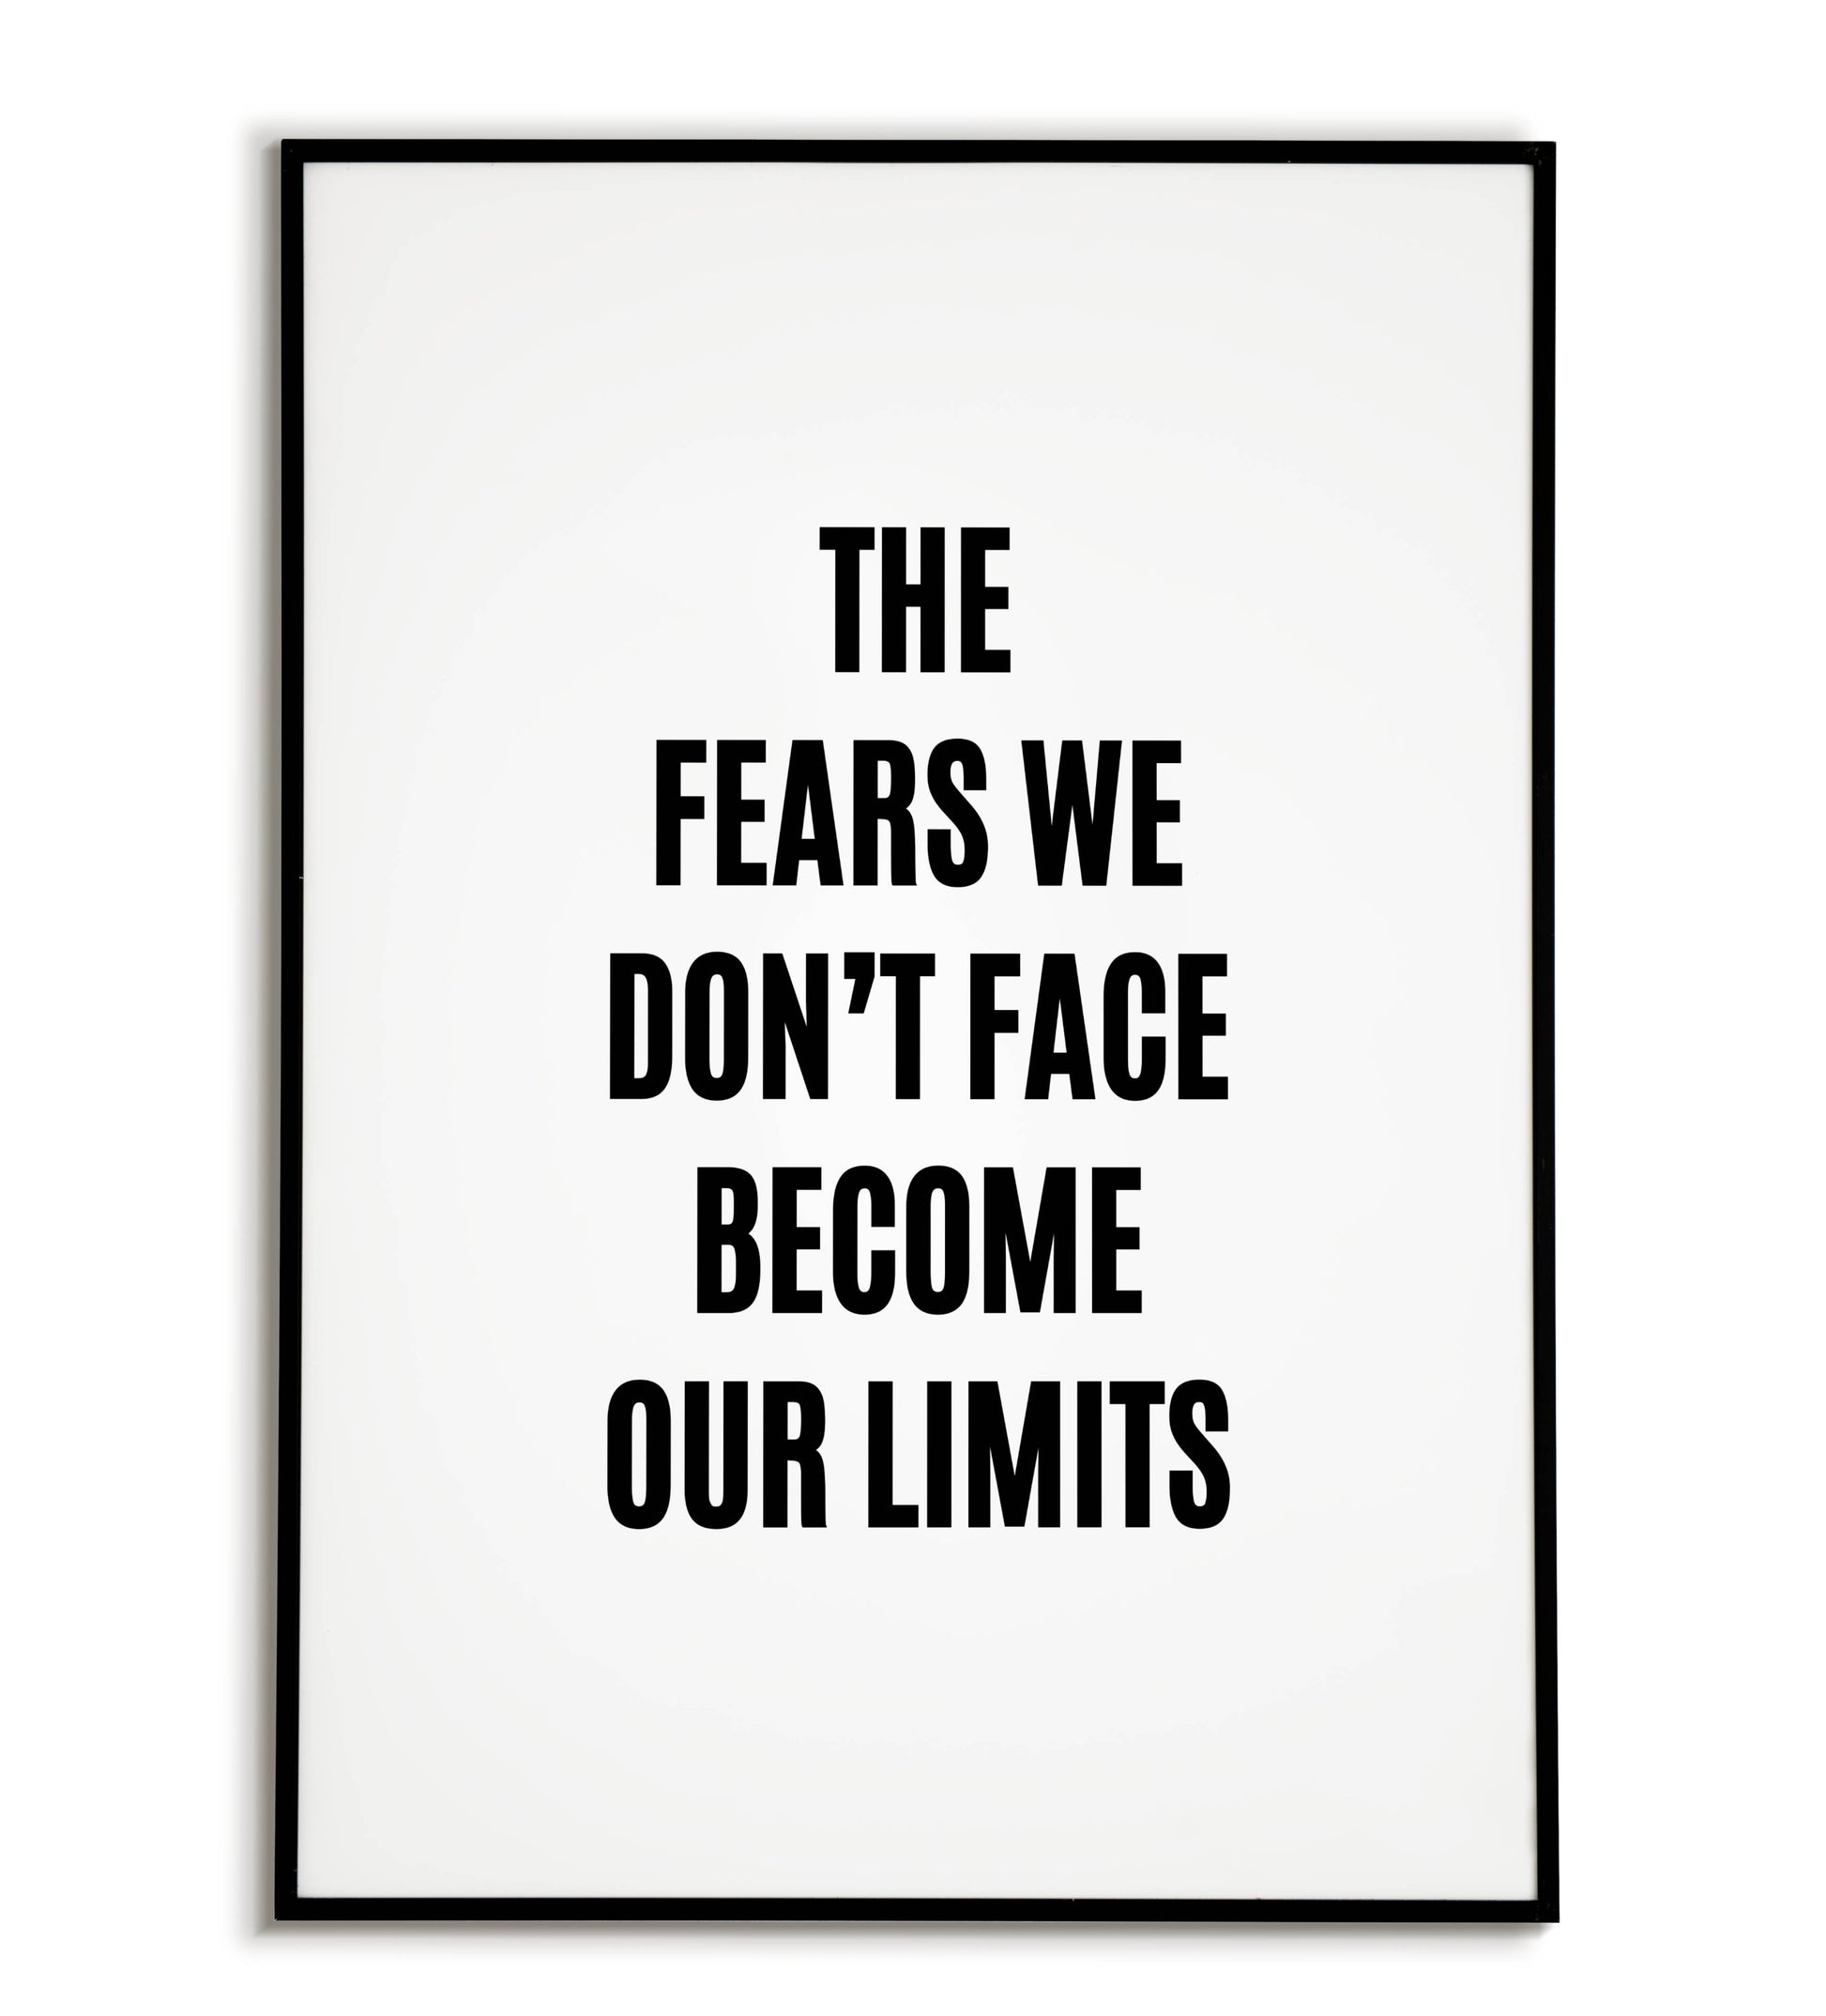 The fears we don't face become our limits" typographic motivational poster.